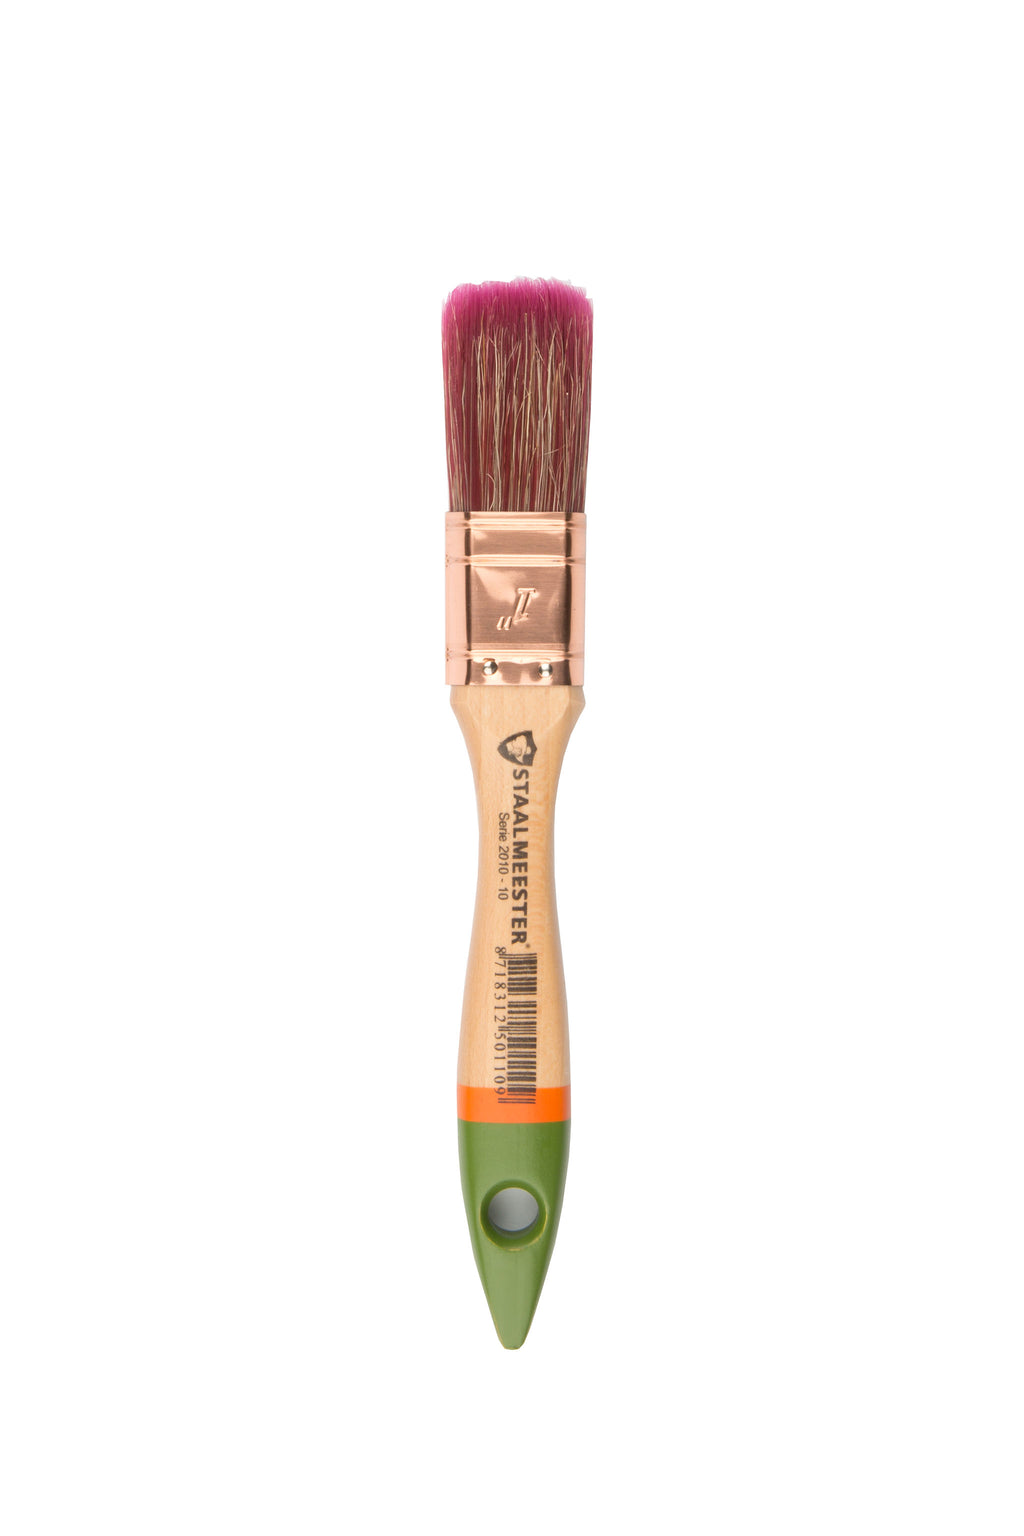 Staalmeester Flat Fusion Brush 1 inch